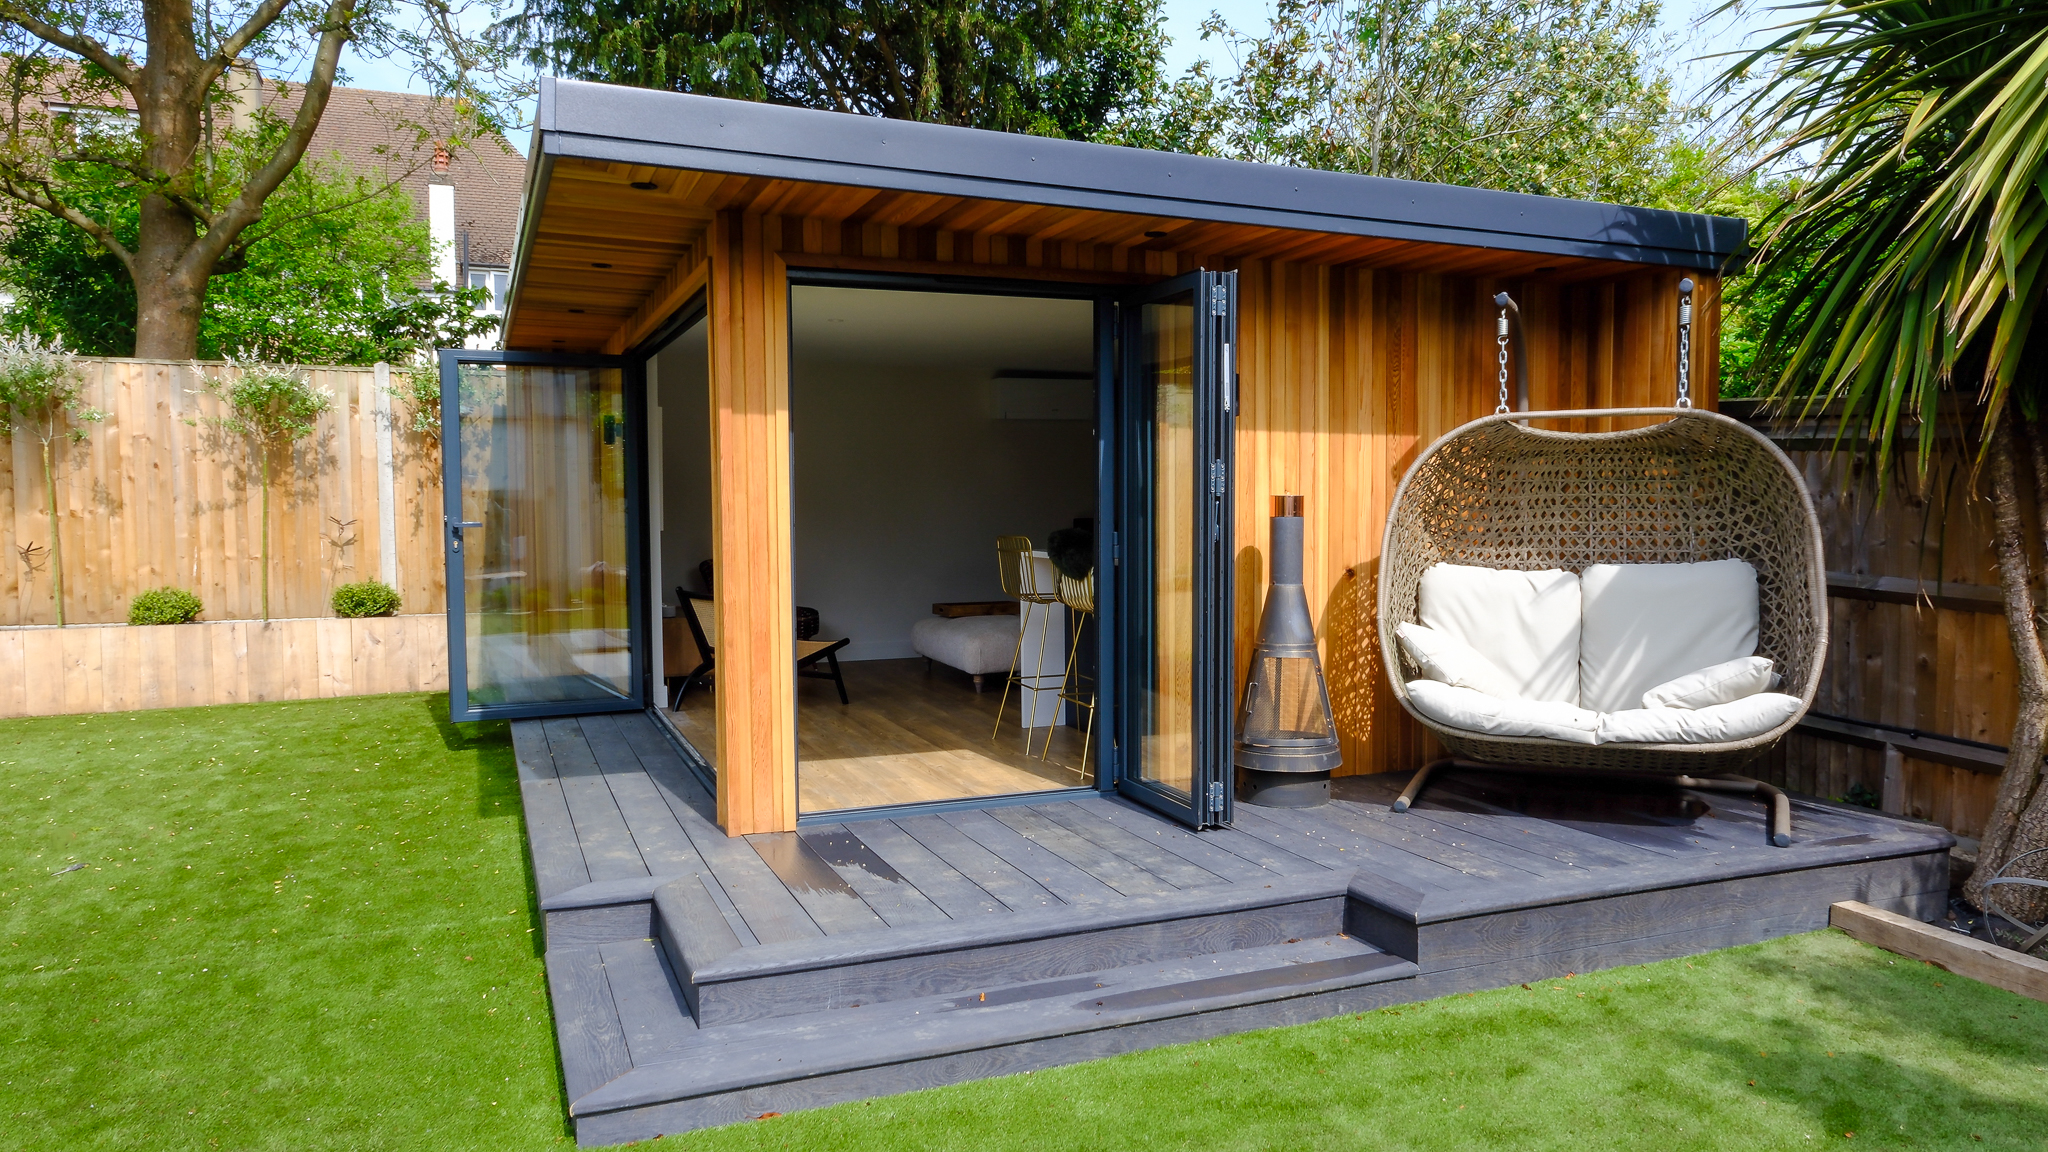 Small wooden garden room with black deck and comfy two-seater outside